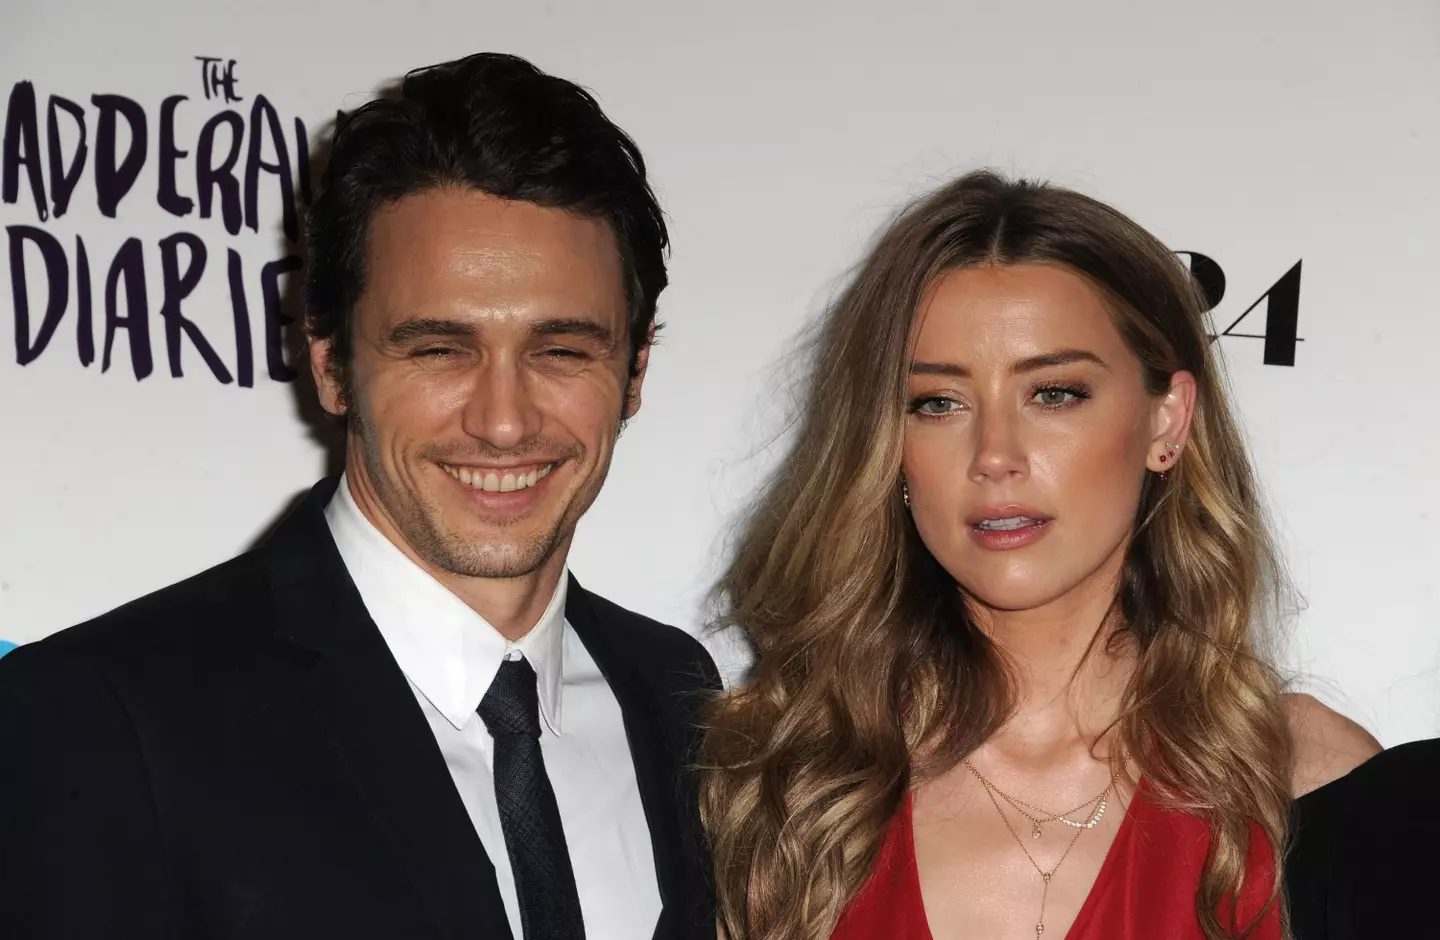 Amber Heard stated that James Franco asked her, 'What the f**k' happened to her face.